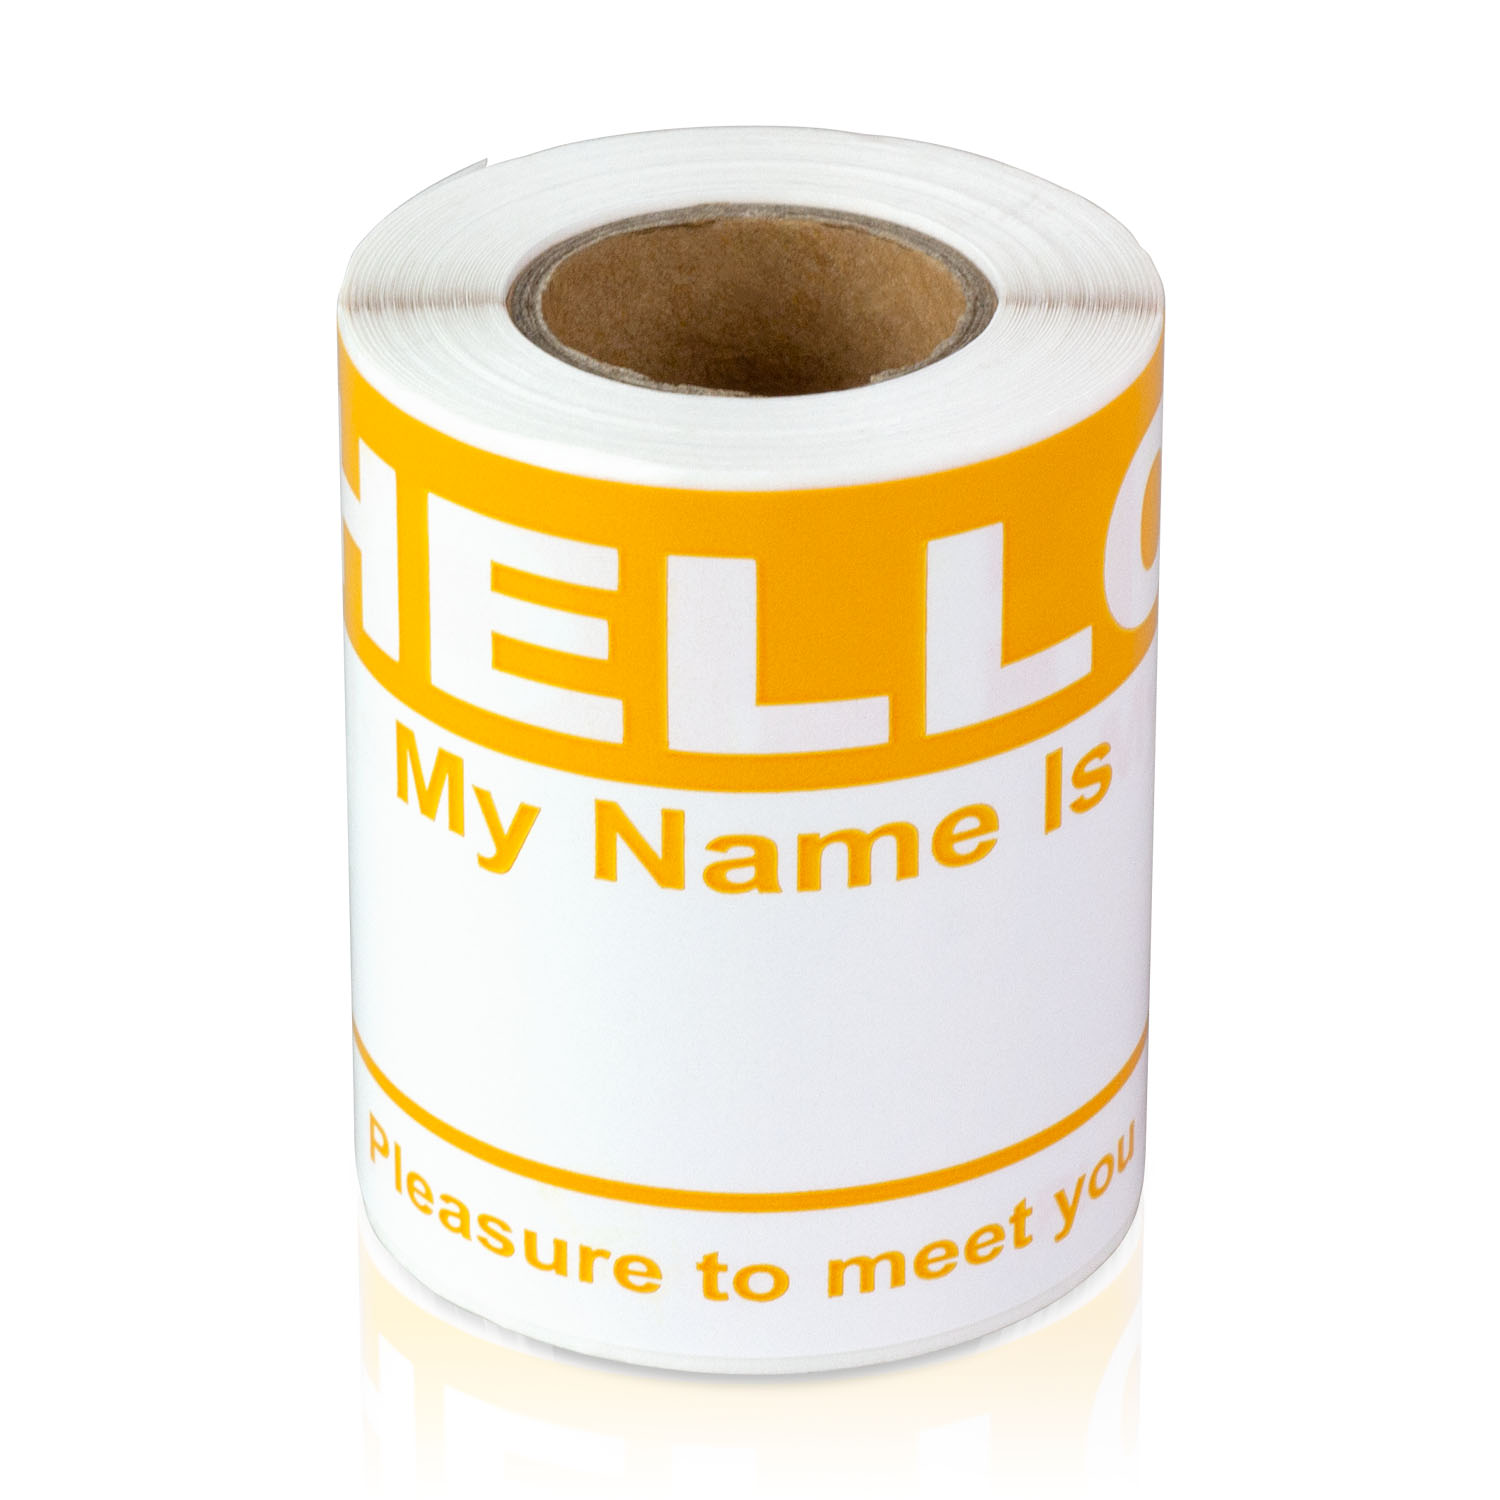 OfficeSmartLabels 4" x 2-5/16" Hello My Name is Labels Name Tag (Orange, 100 Labels per Roll) - image 2 of 2